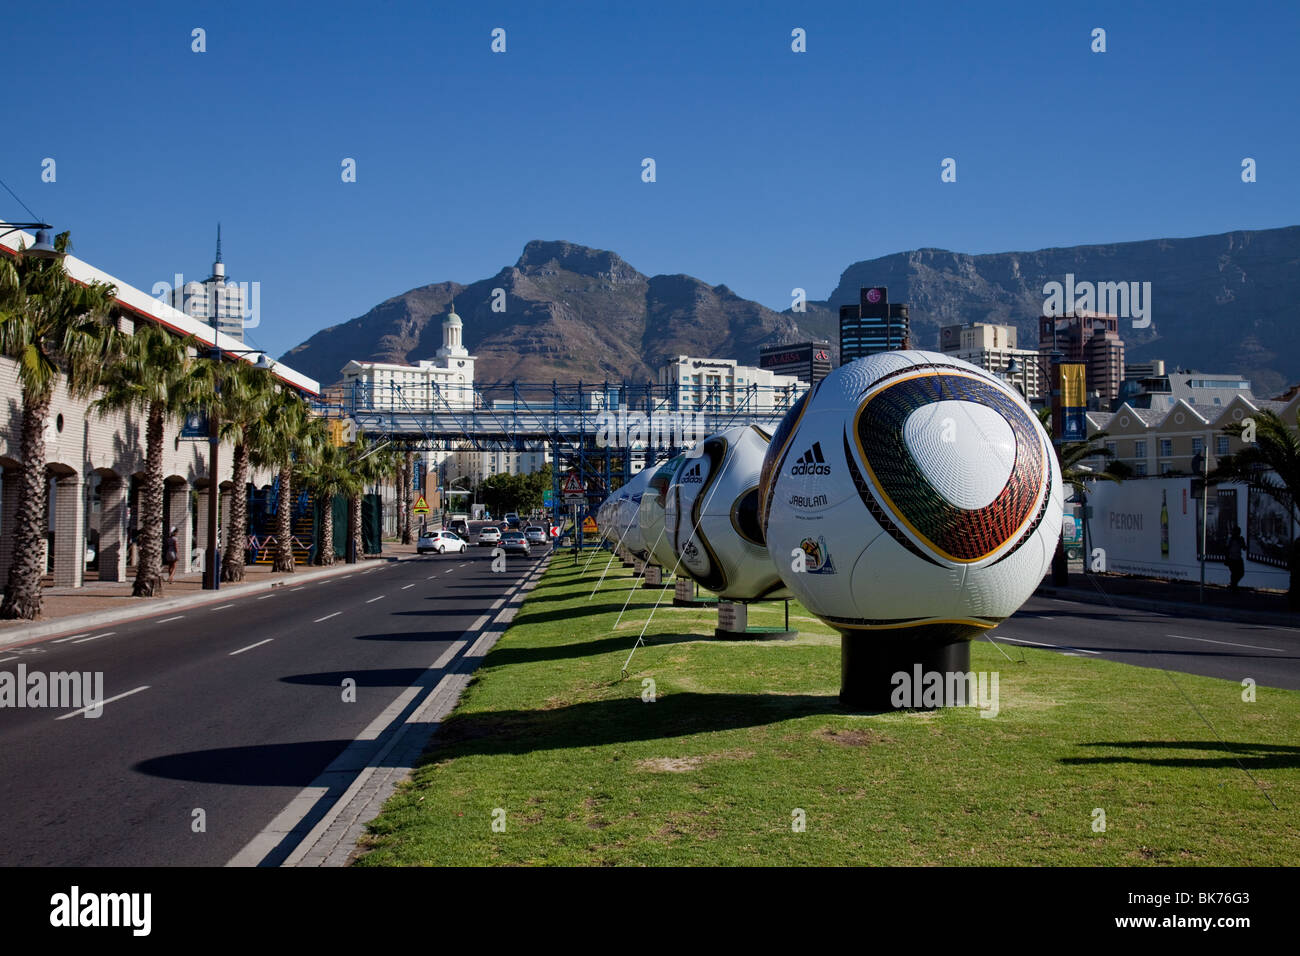 Giant footballs along a road in Cape Town, South Africa Stock Photo